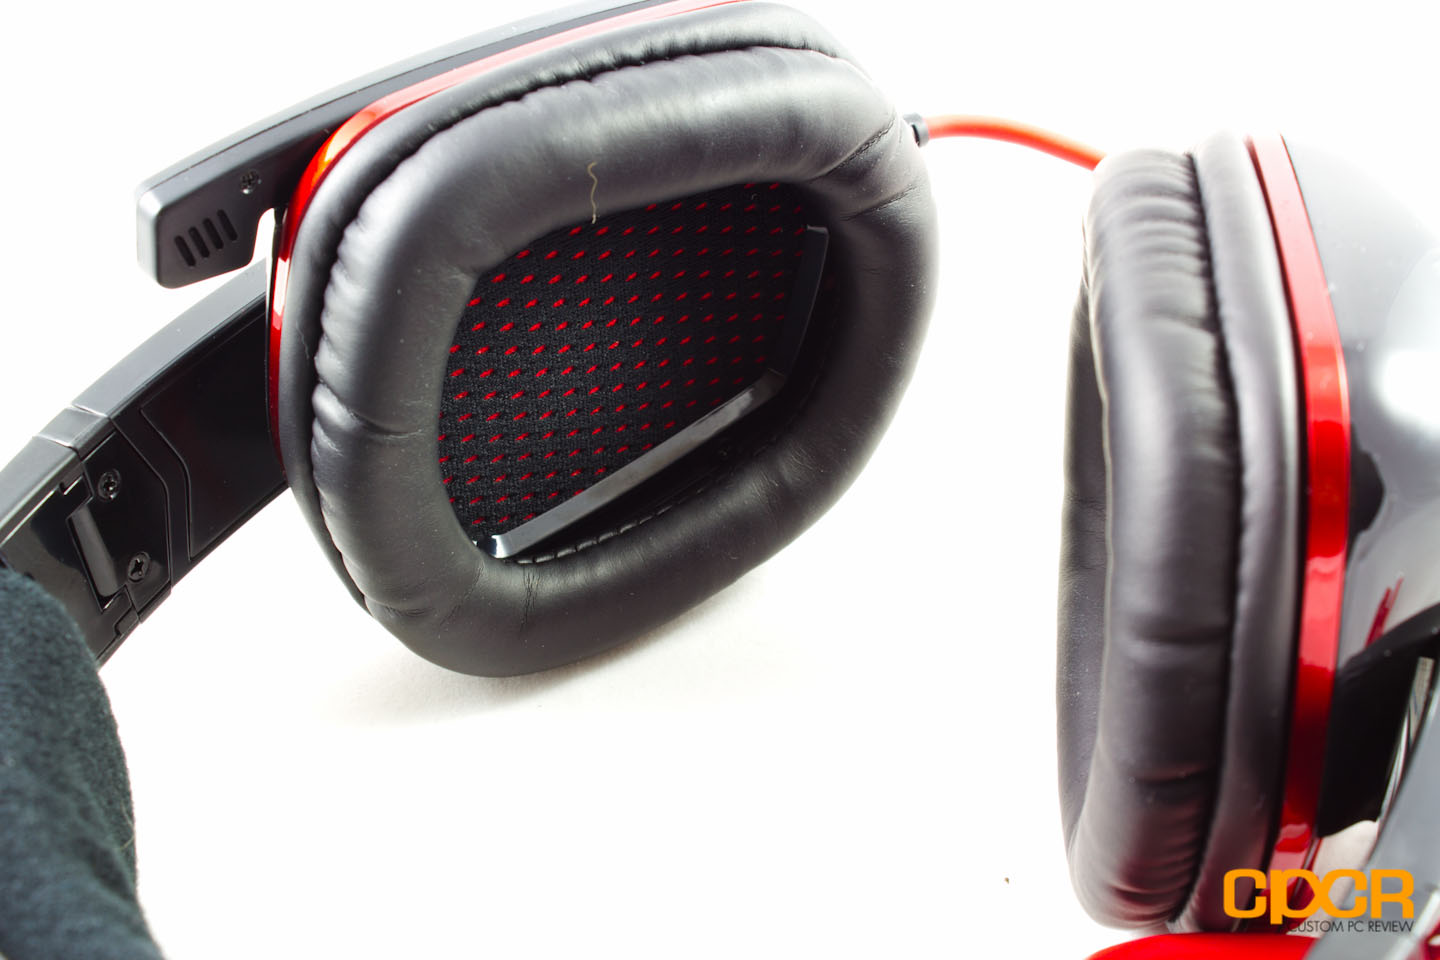 AZiO Levetron GH808 Gaming Headset Review | Custom PC Review